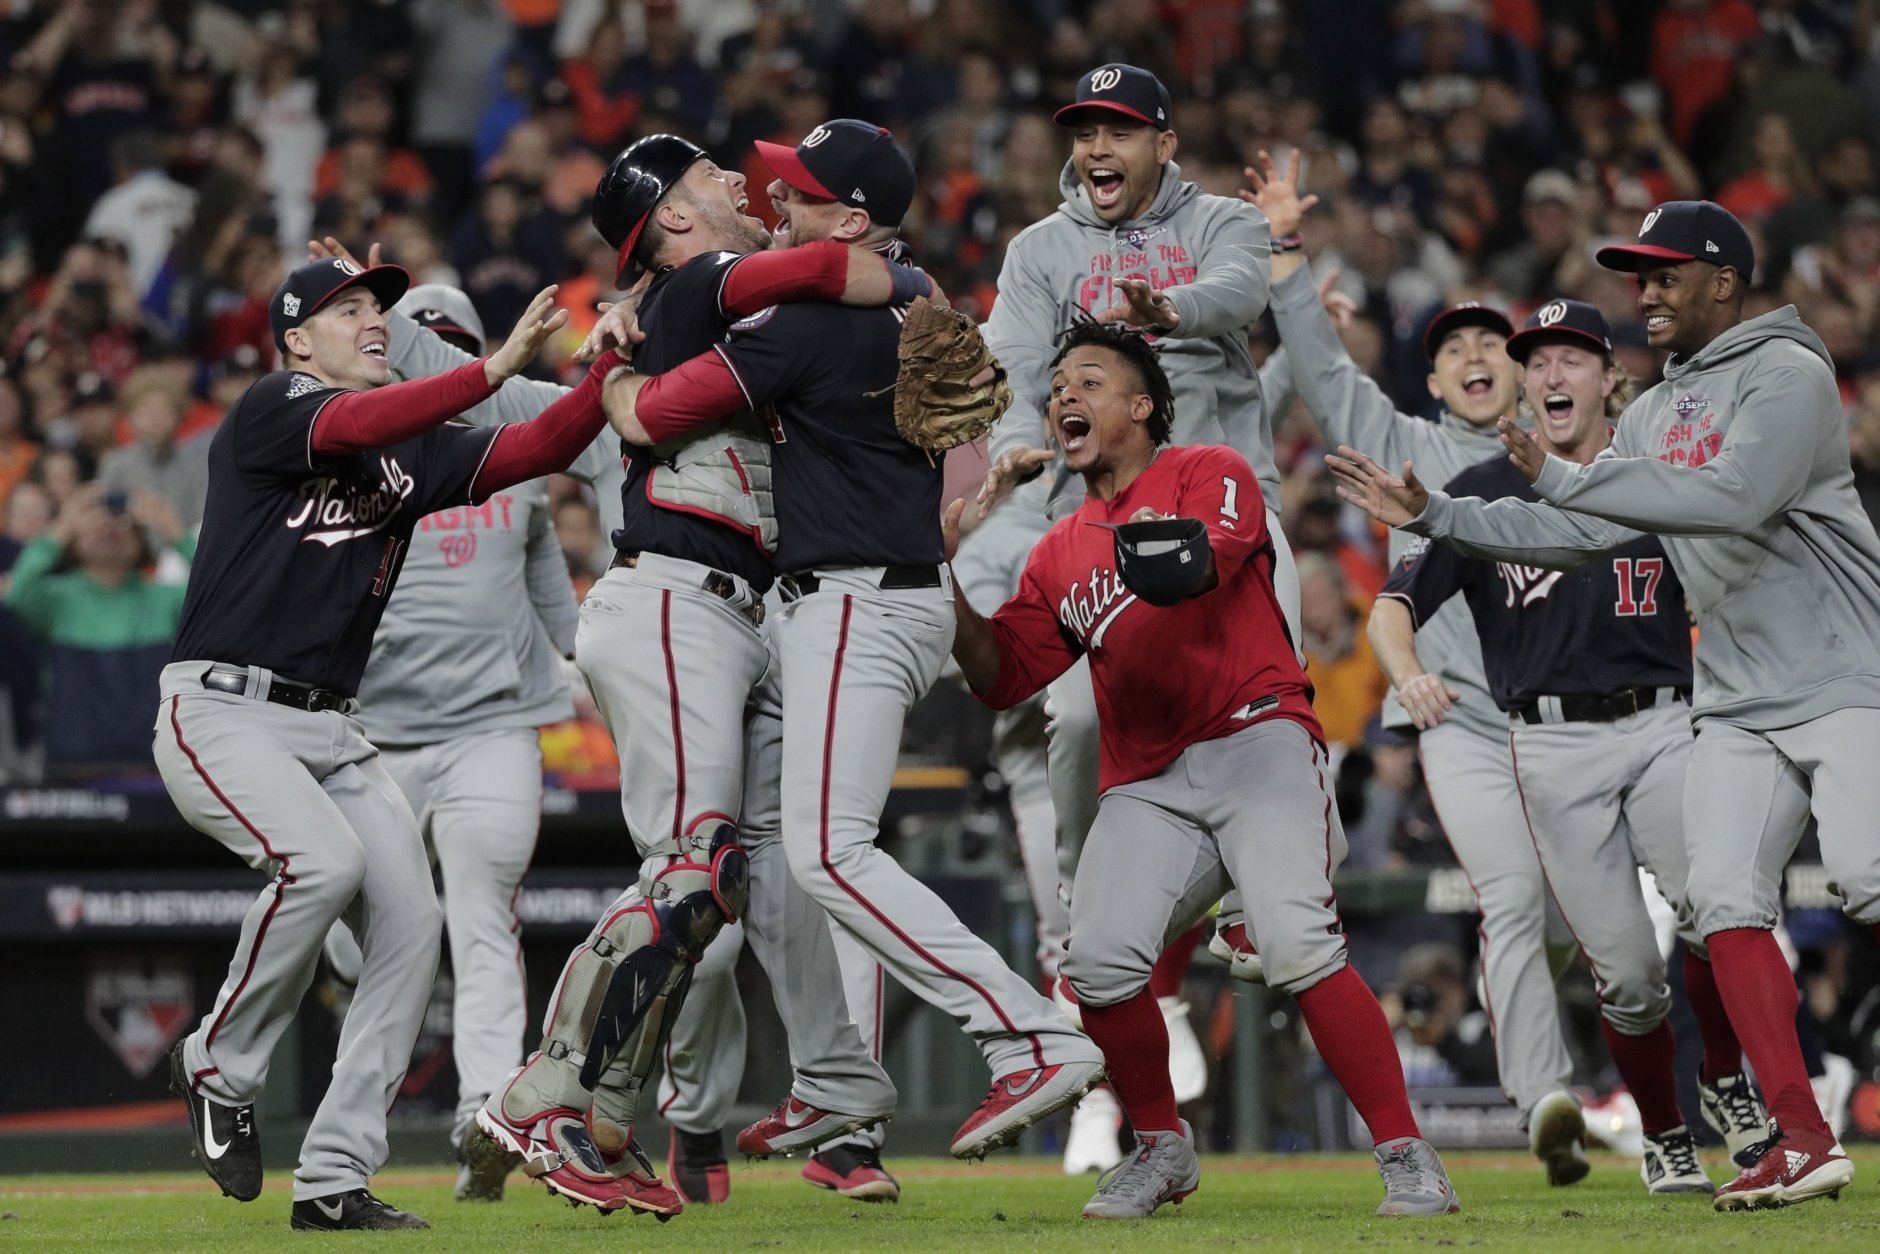 Washington Nationals' Yan Gomes and Daniel Hudson celebrate after Game 7 of the baseball World Series against the Houston Astros Wednesday, Oct. 30, 2019, in Houston. The Nationals won 6-2 to win the series. (AP Photo/David J. Phillip)